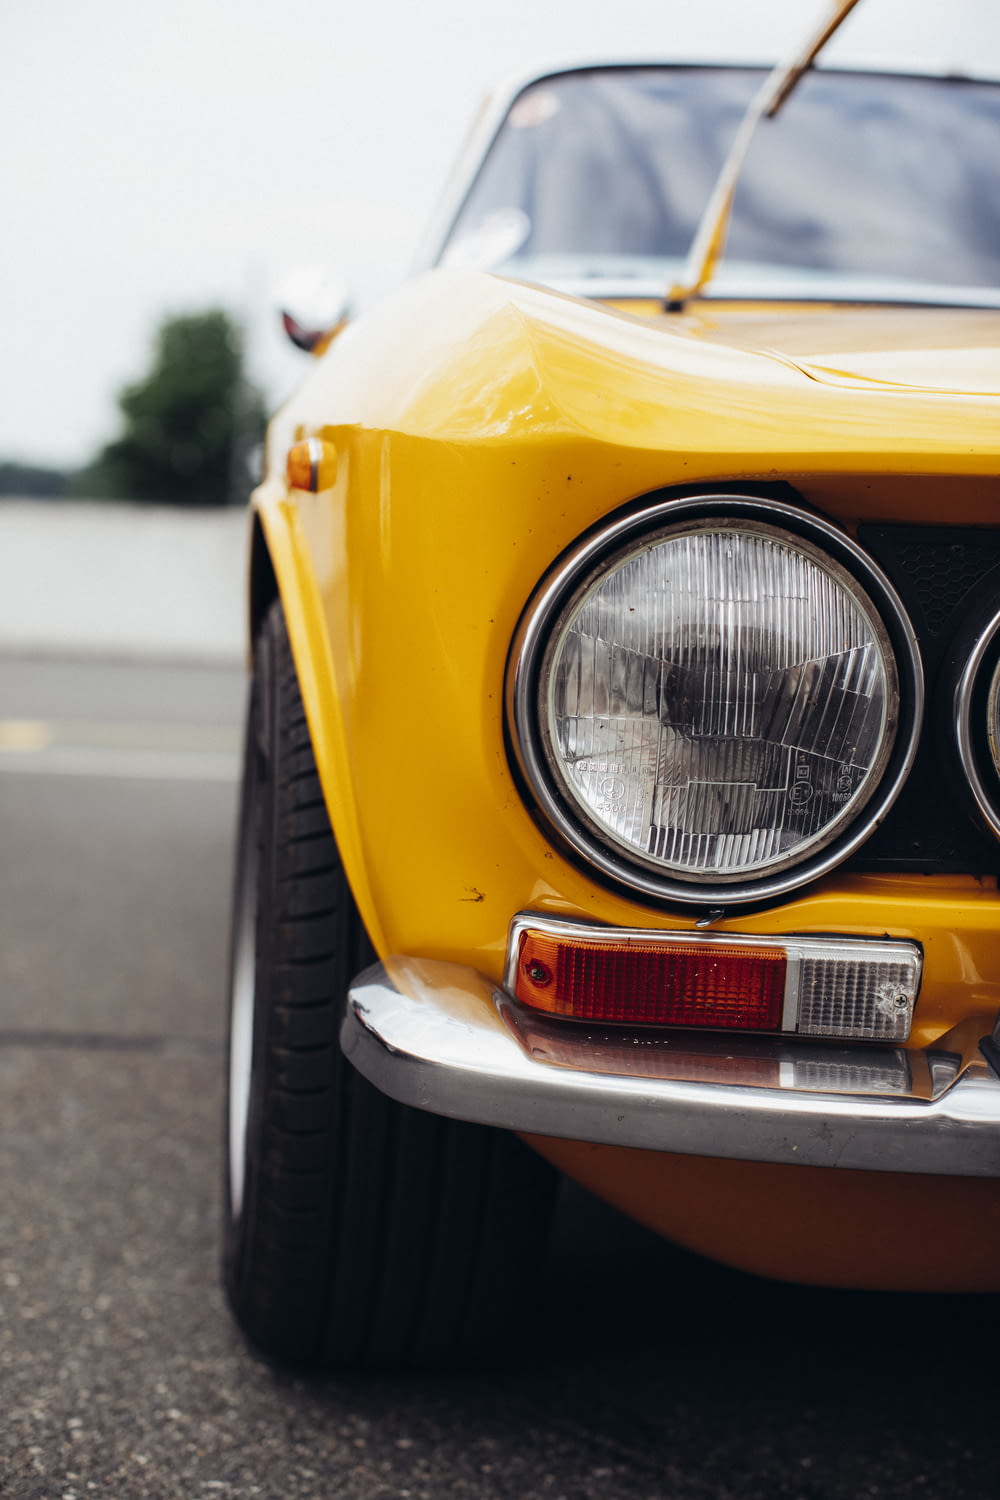 a close up of the front of a yellow sports car